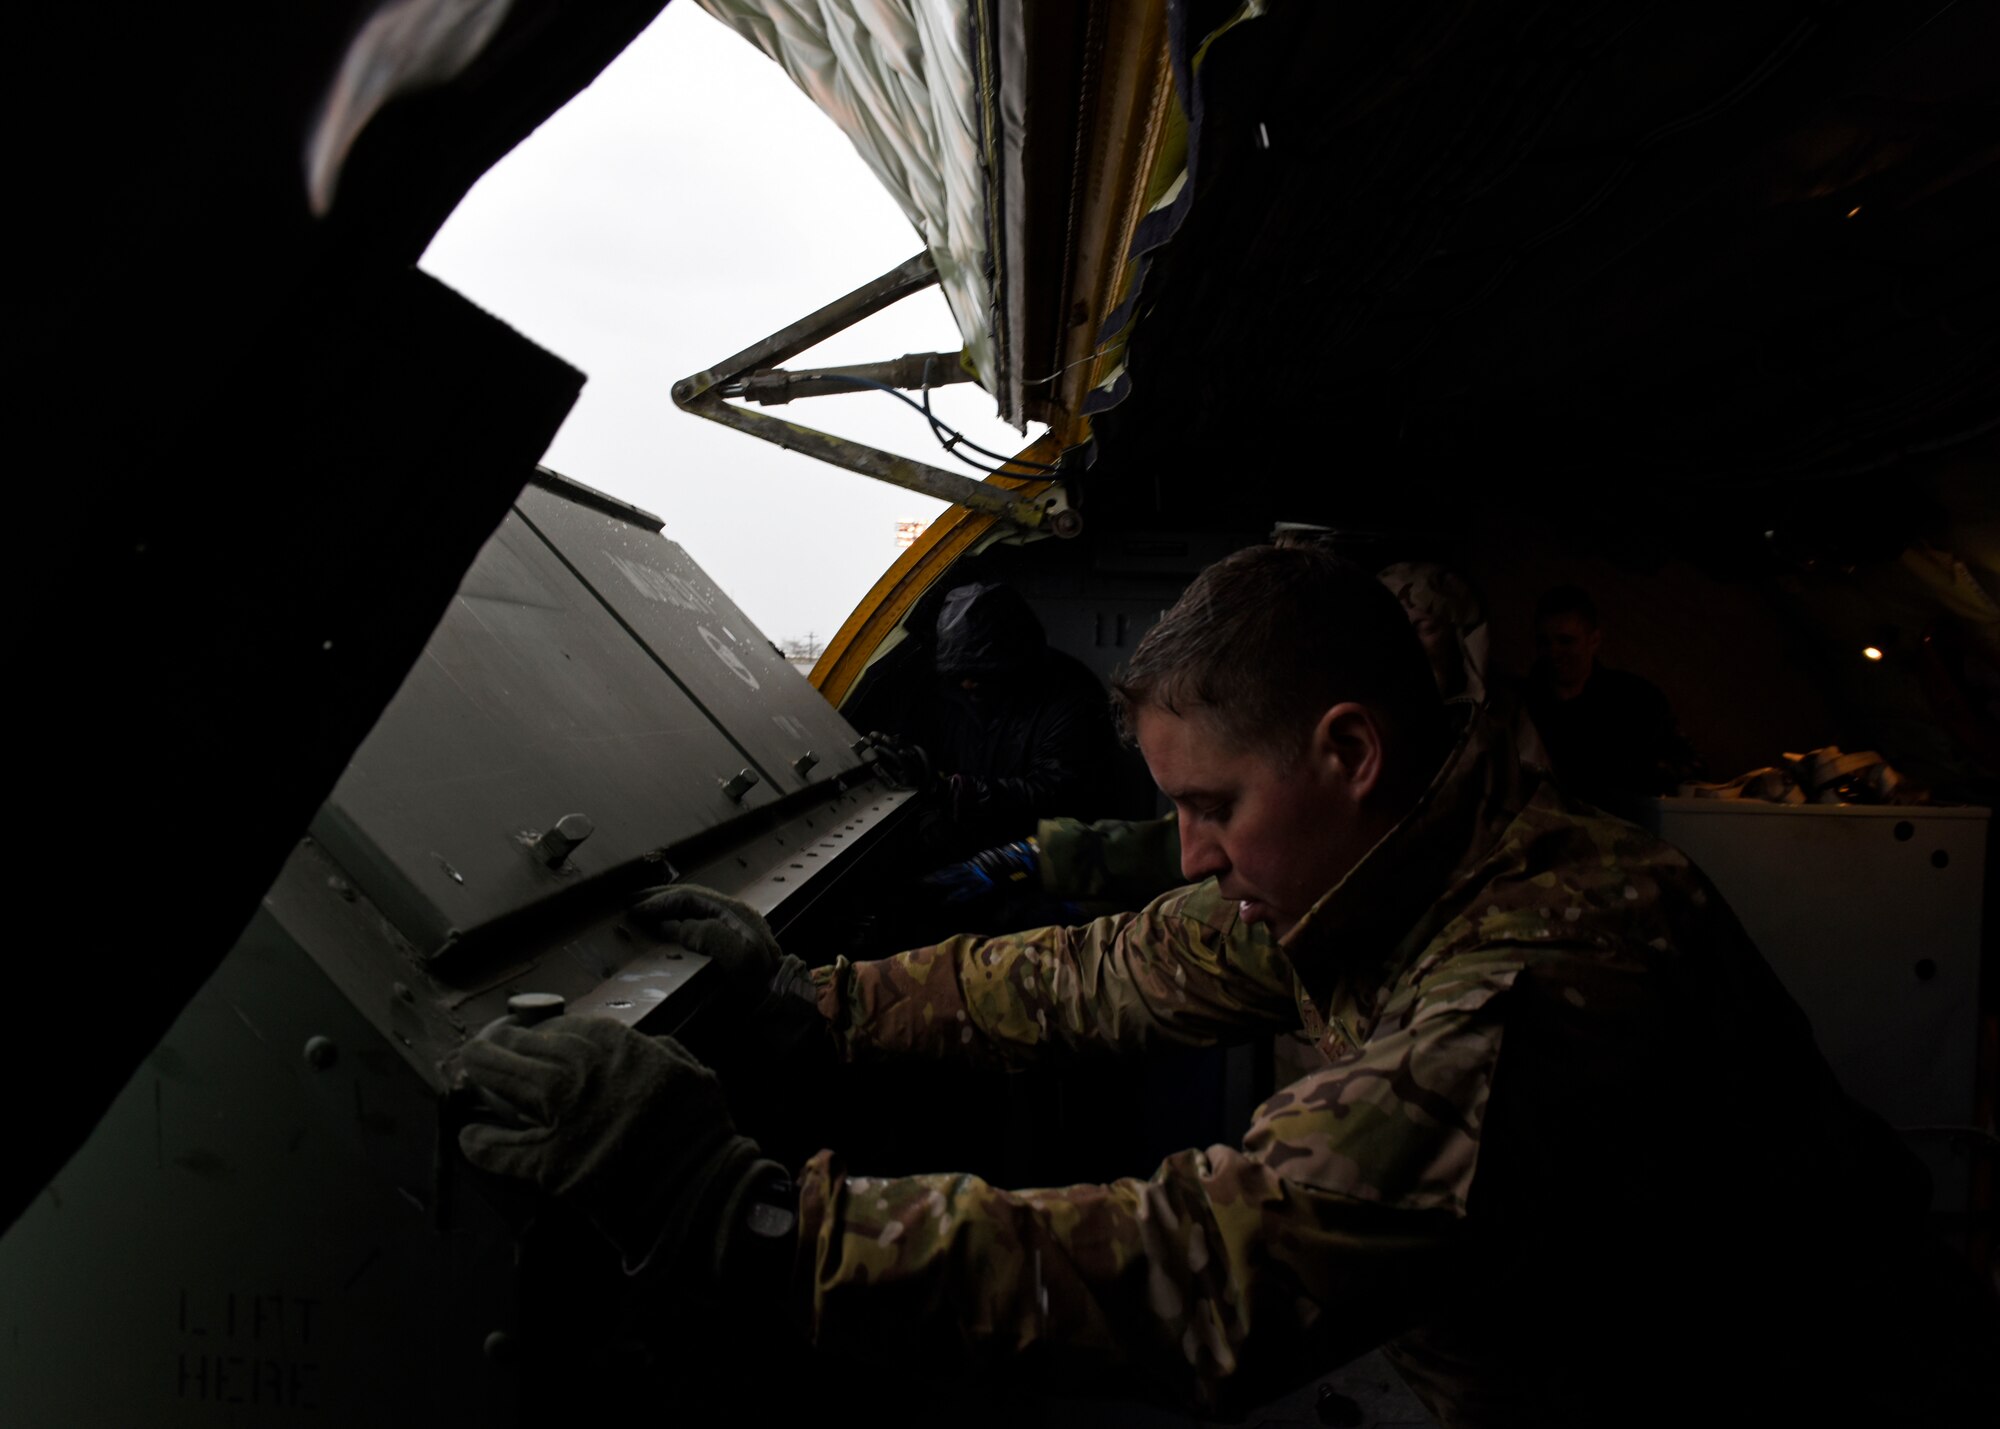 U.S. Air Force Master Sgt. Christopher Staton, 93rd Air Refueling Squadron aircrew training superintendent, pushes cargo onto a K Loader during an Installation Mission Assurance Exercise at Beale Air Force Base, California, Feb. 26, 2019. Beale AFB provided Fairchild Airmen with support through vehicle operations, aerial port, aircraft support equipment and lodging. Additionally, the 940th Air Refueling Wing Air Force Reserve unit at Beale partnered with Fairchild to practice air refueling capabilities in a simulated combat zone. (U.S. Air Force photo by Senior Airman Jesenia Landaverde)